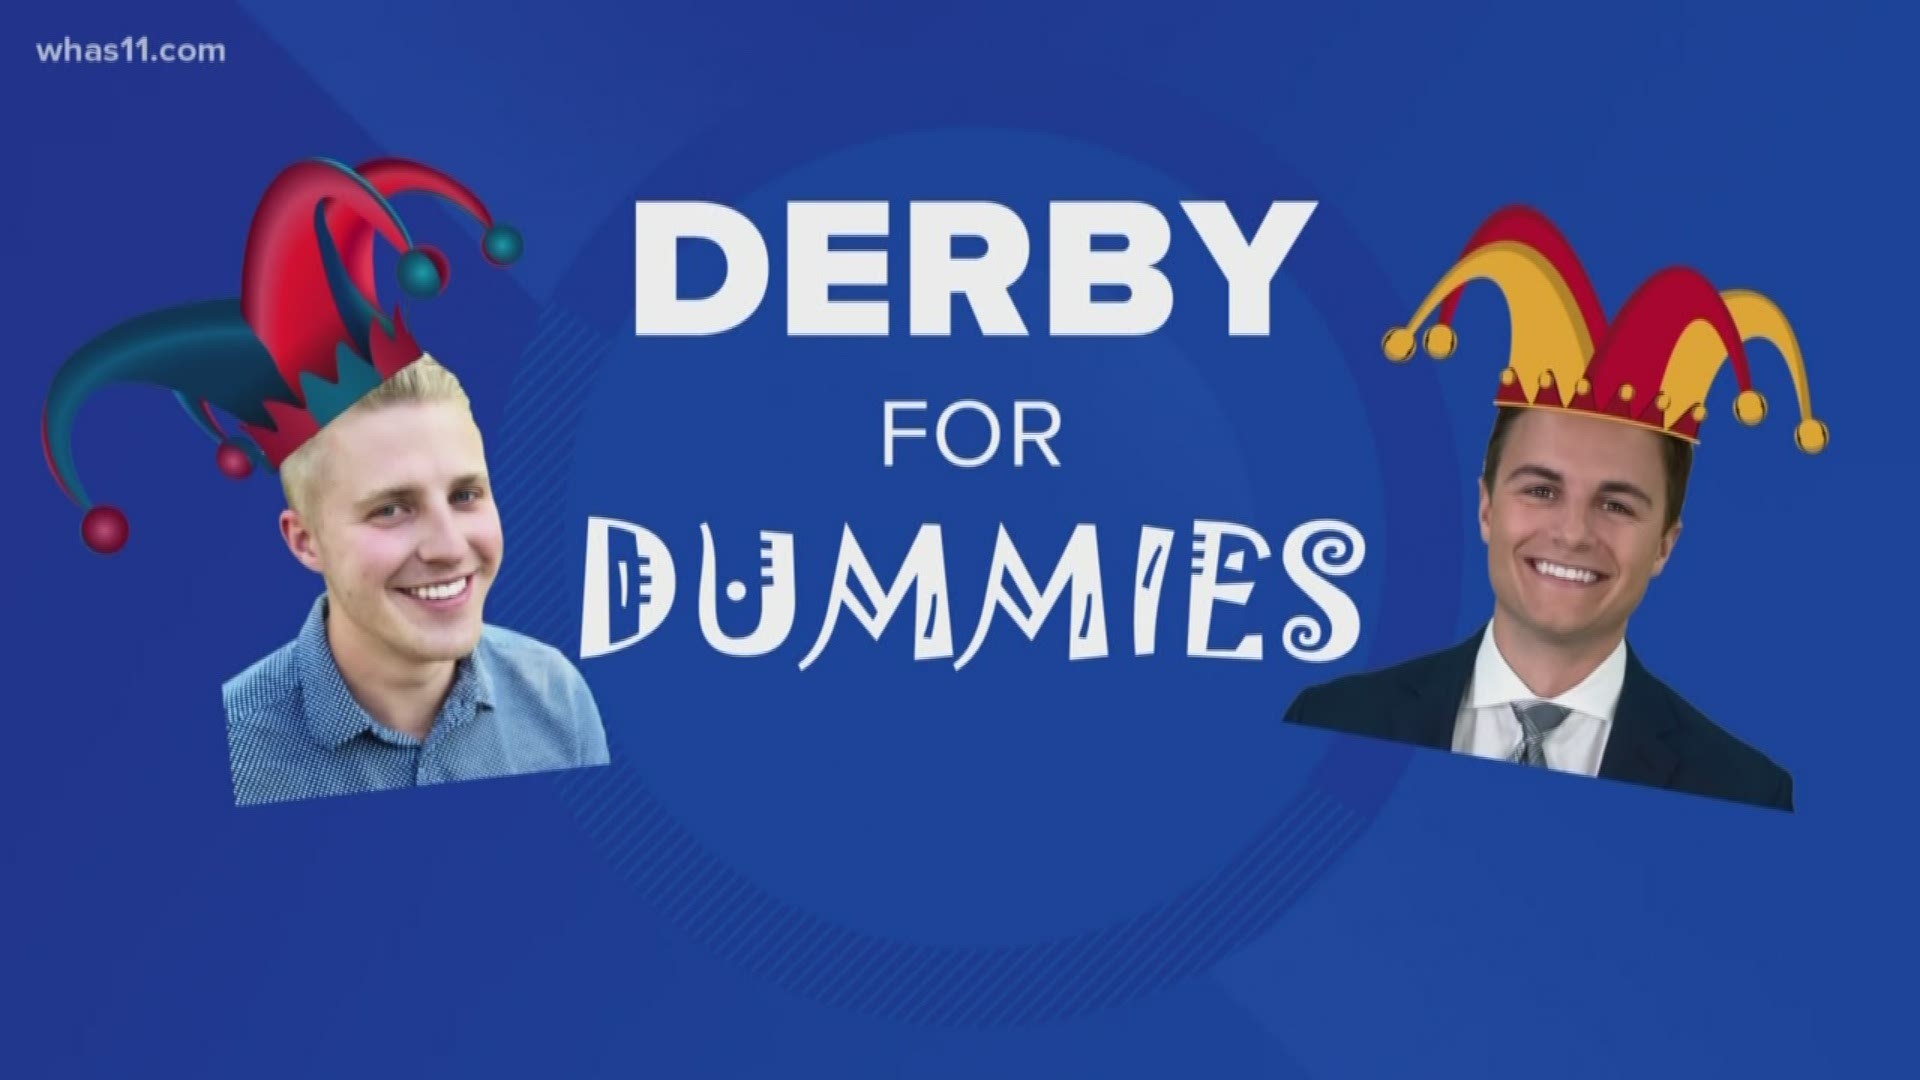 Hi, I'm Daniel… and I'm Rob… and we're Derby Dummies…This year is going to be the first Derby for both of us